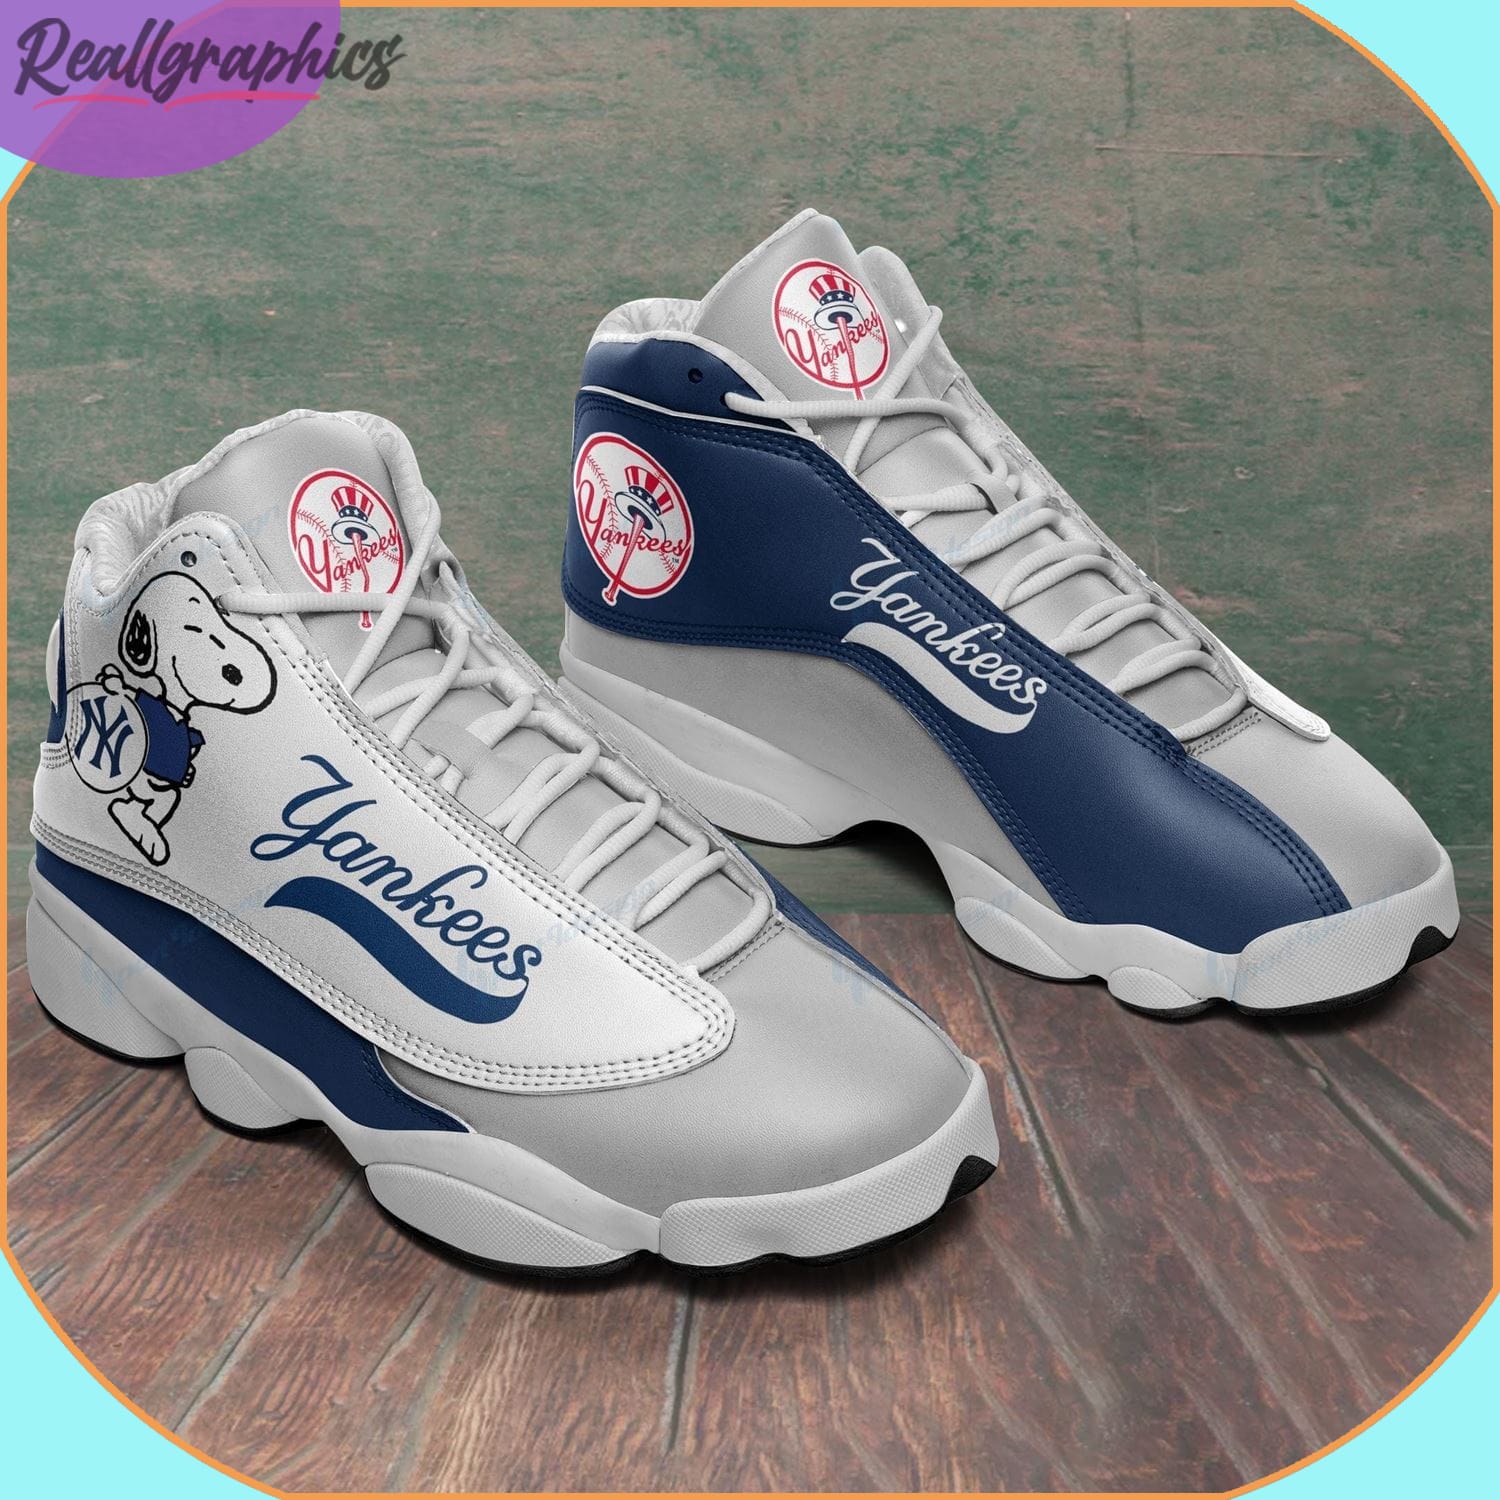 Mlb York Yankees Limited Edition Air Jordan 13 Shoes For Fans